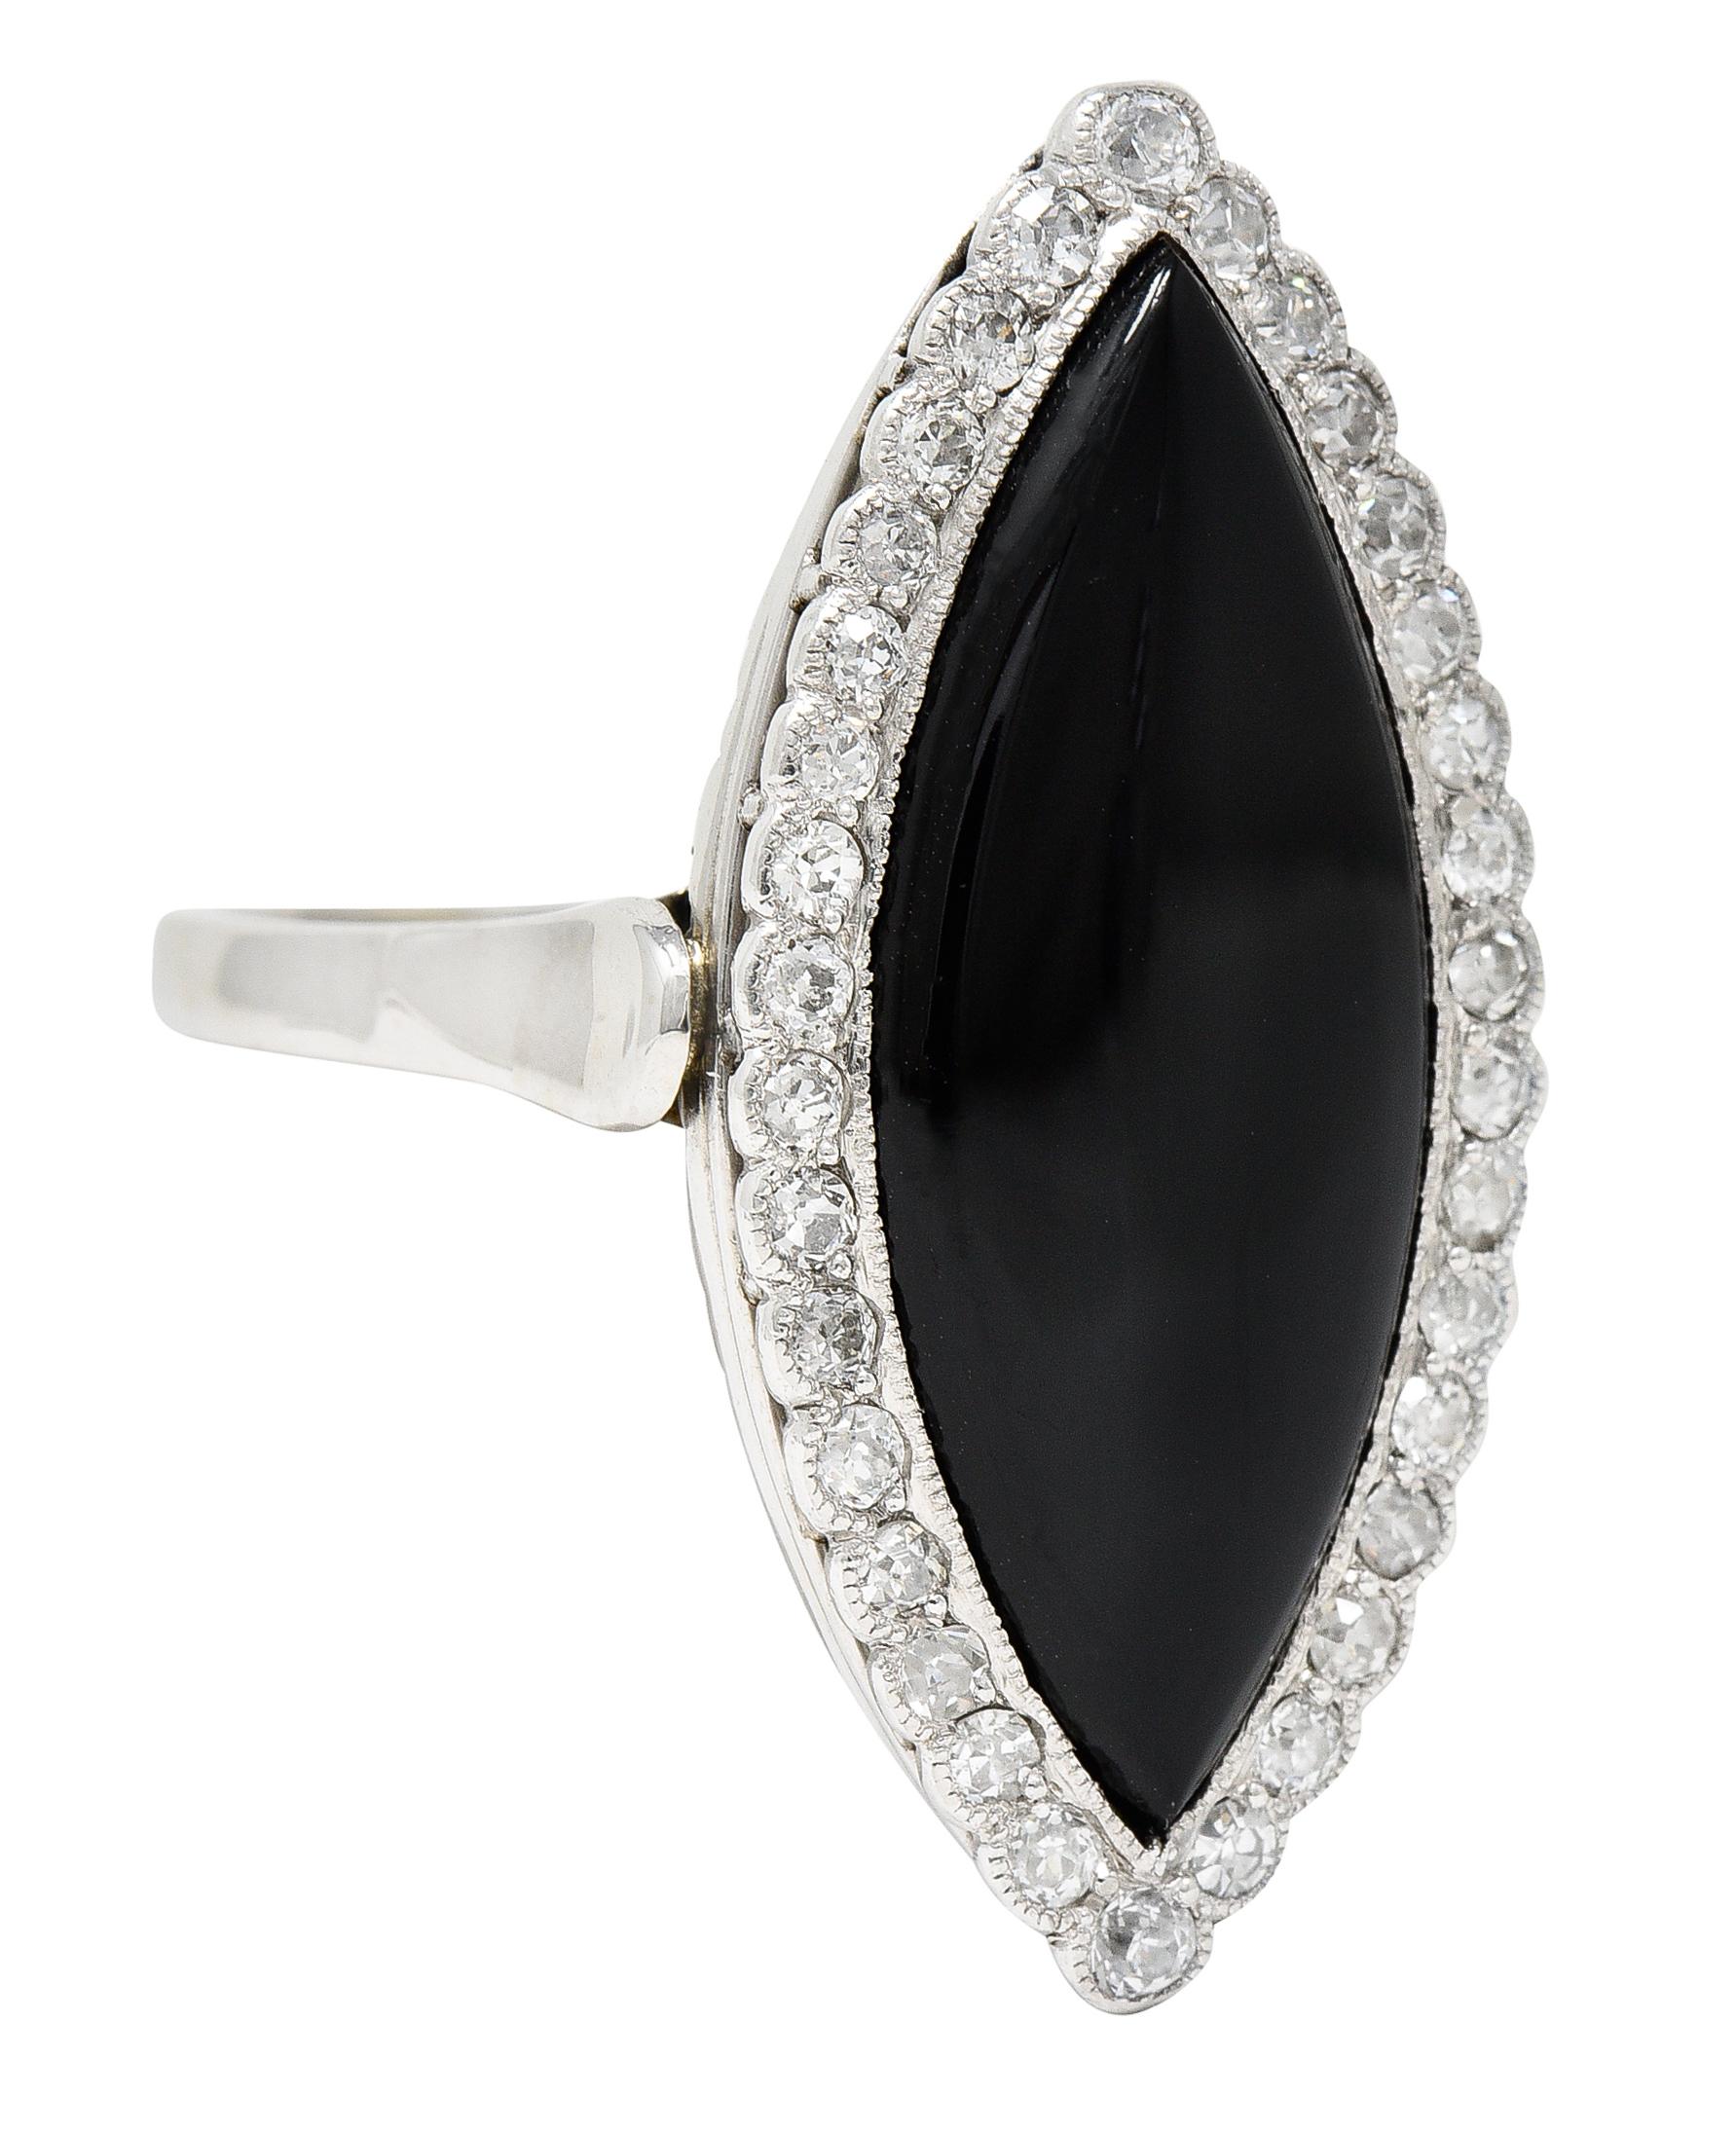 Ring is designed as a substantial navette form. Featuring navette shaped calibrè cut onyx measuring approximately 27.5 x 11.0 mm. Opaque black with excellent polish. Surrounded by a halo of old European and single cut diamonds. Weighing in total